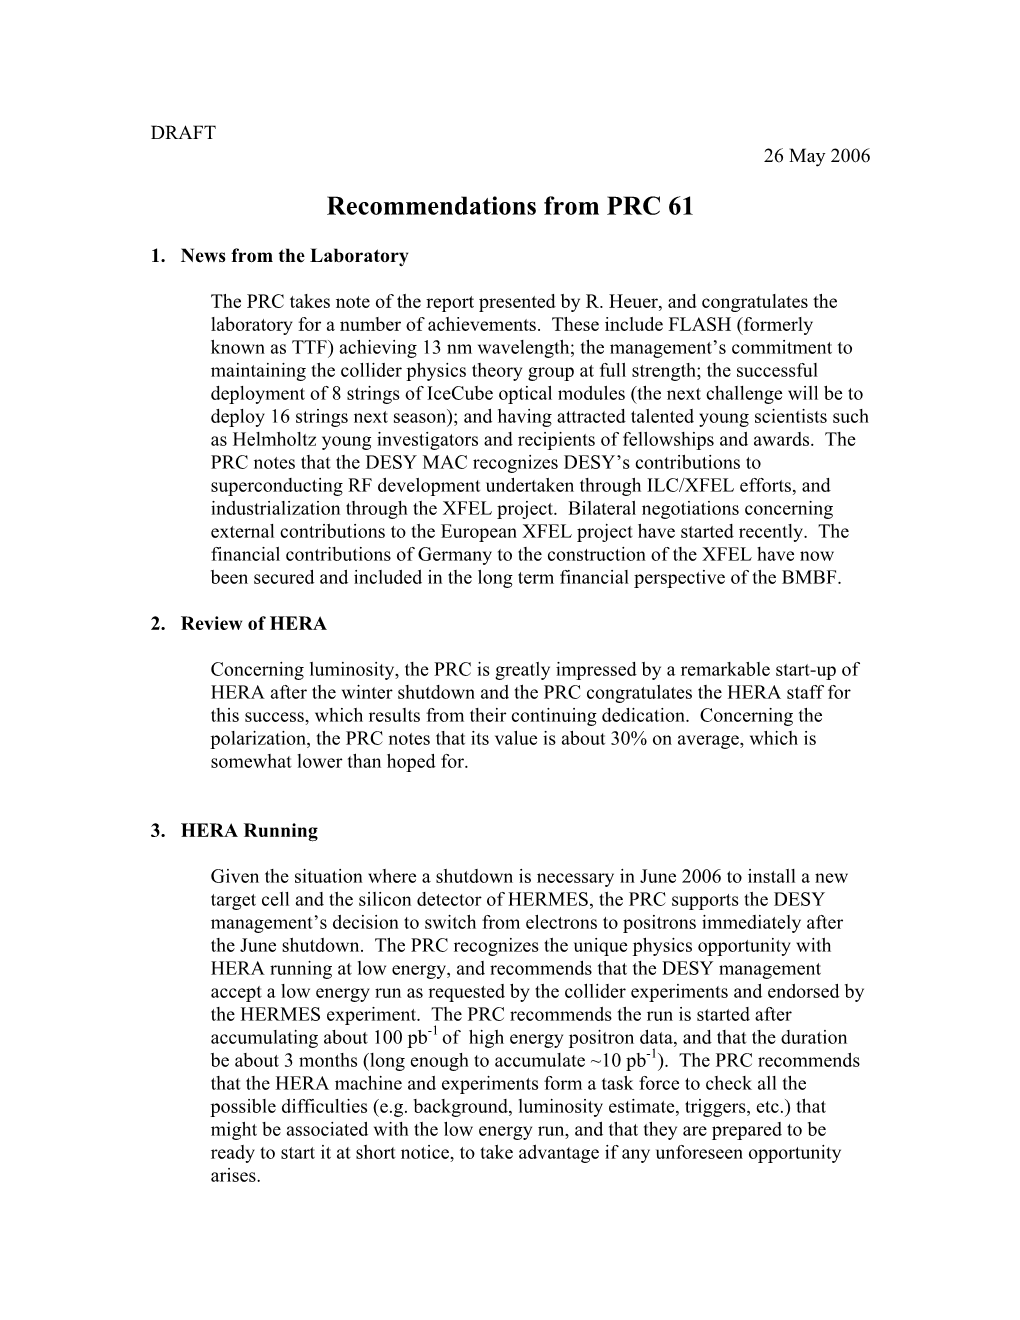 Recommendations from PRC 61